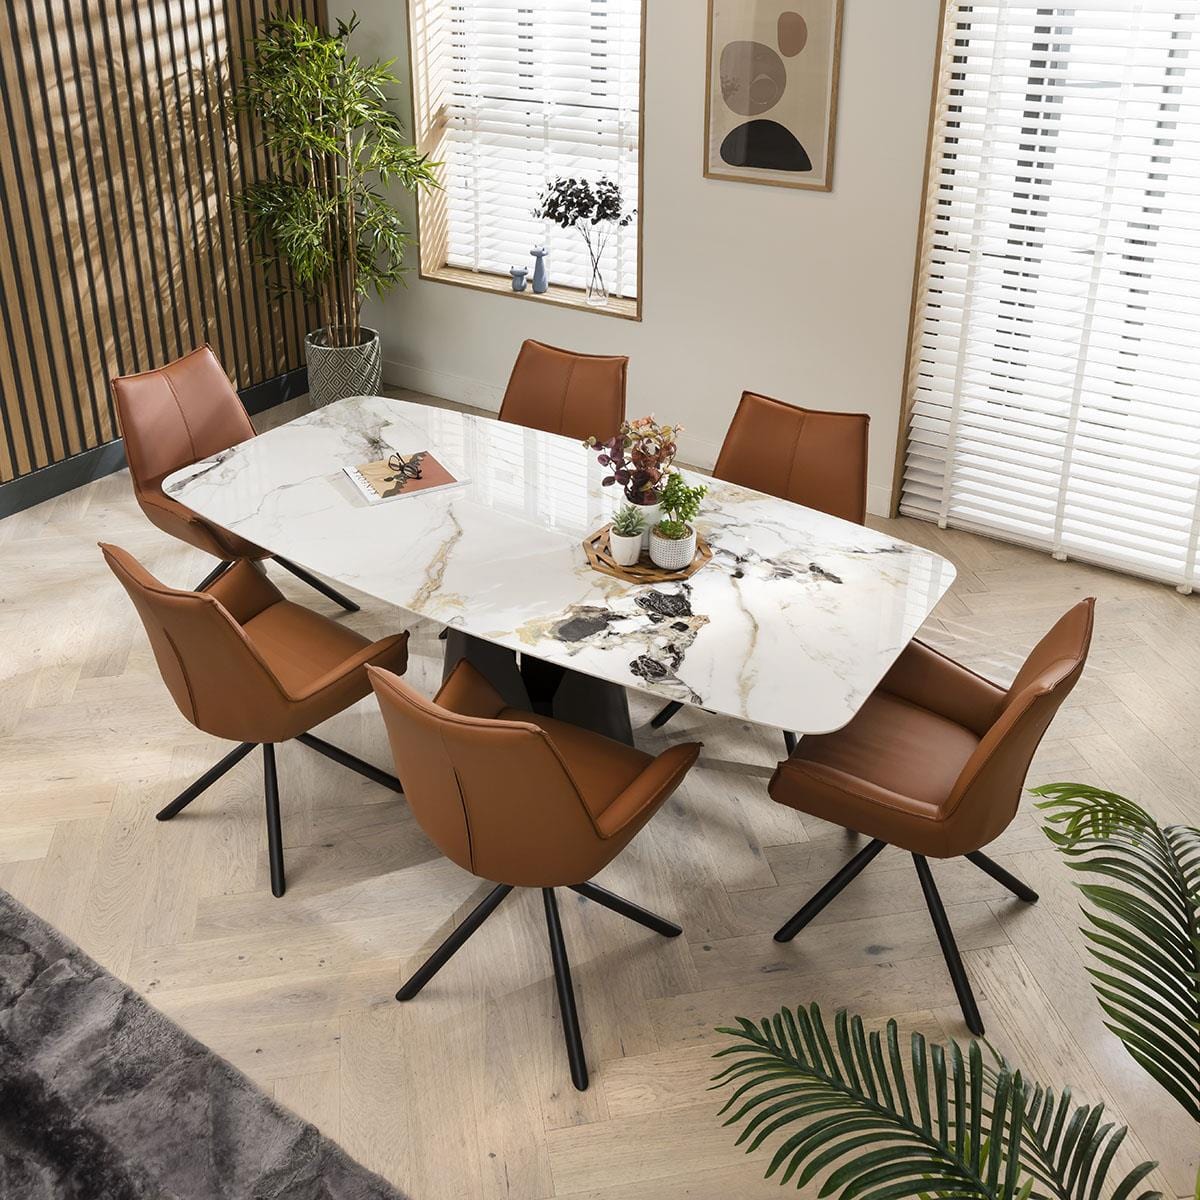 Quatropi 6 Seater Large Dining Set - Ceramic Marble Dining Table - Swivel Leather Chairs